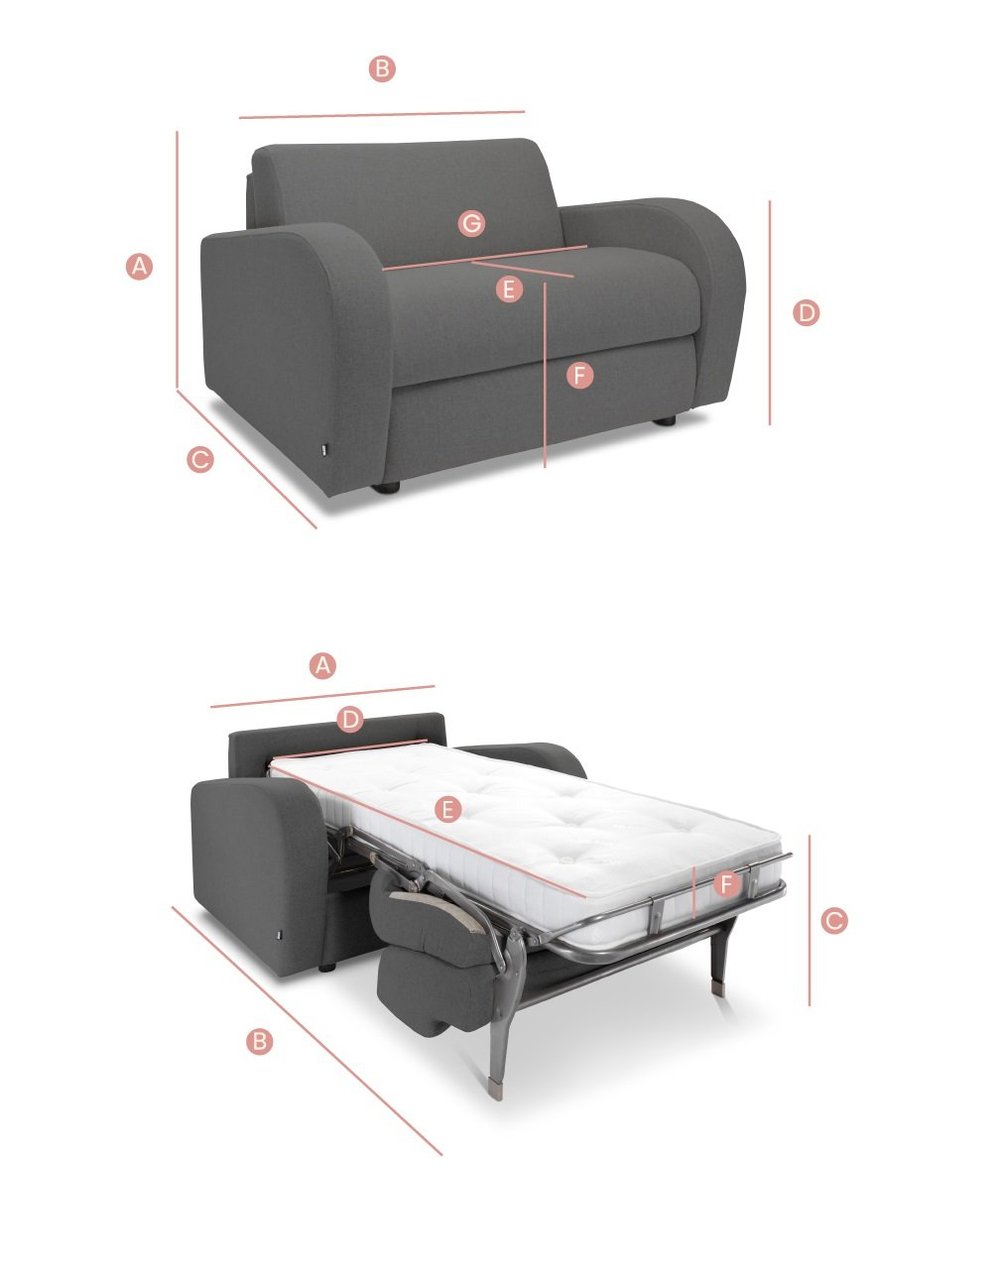 Jay-Be Retro Chair Sofa Bed in Sitting and Sleeping Position Sketches